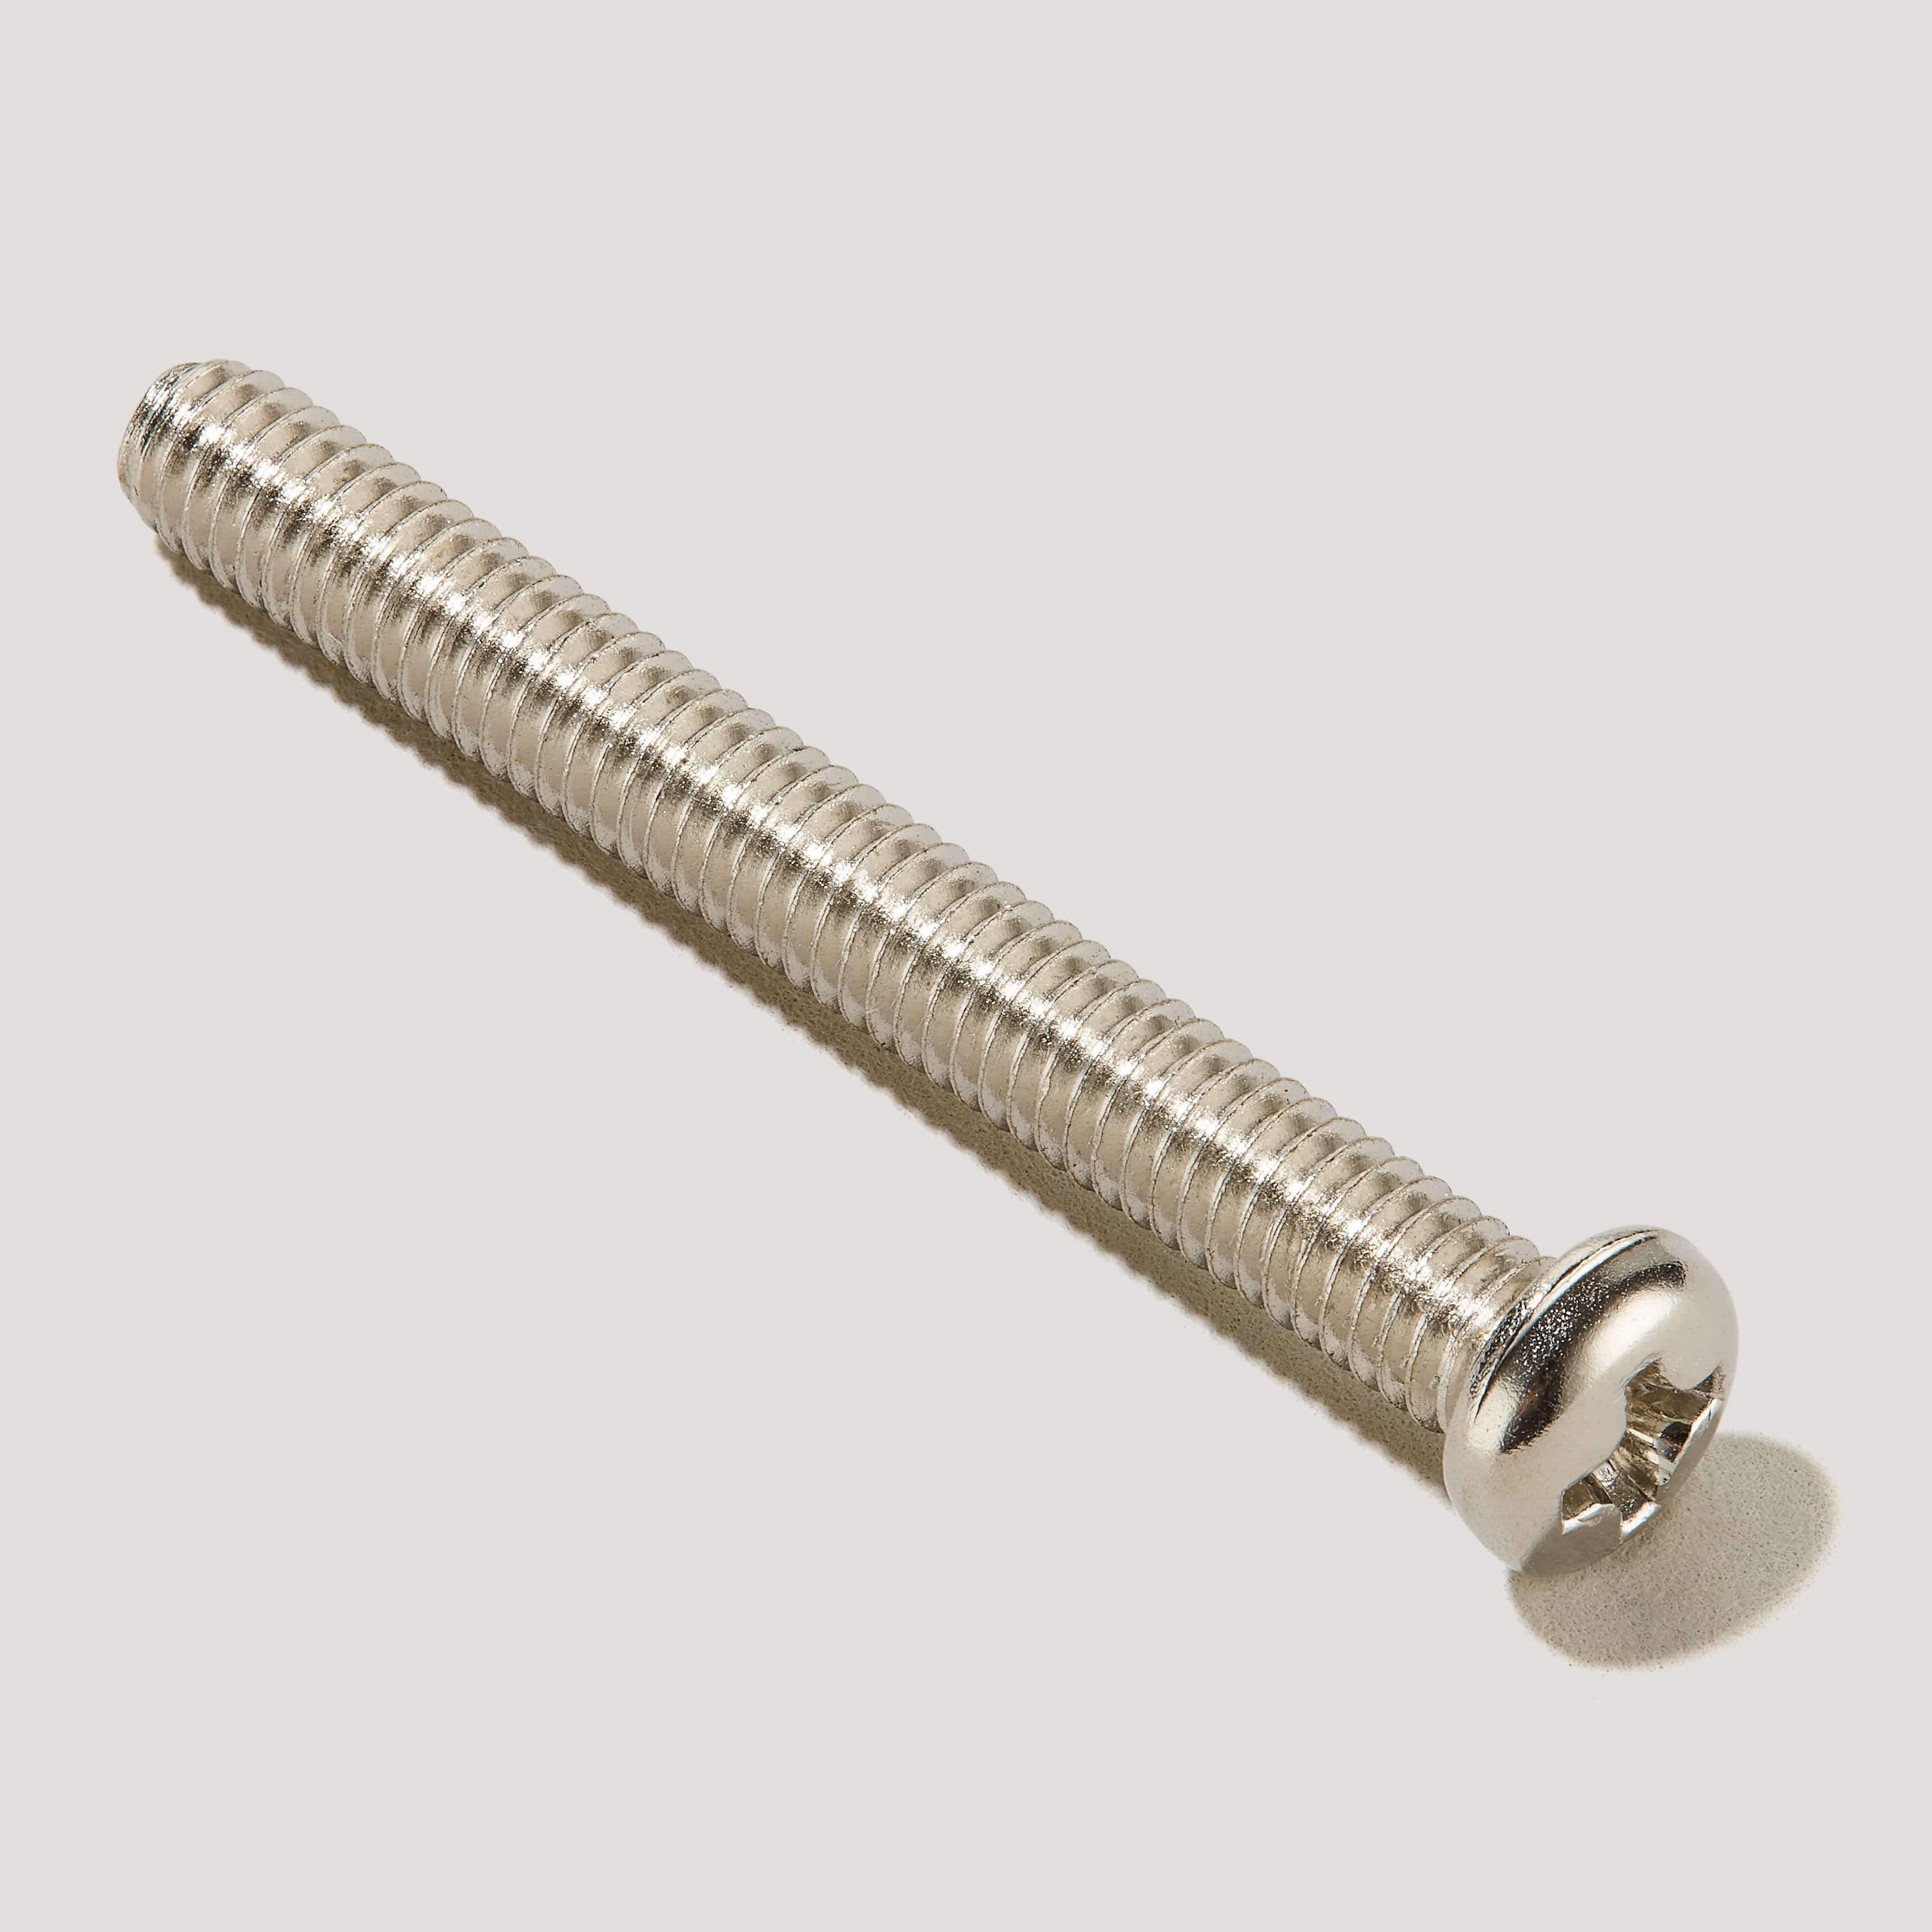 Plank Hardware Screws M4 Screws - Assorted Lengths Available